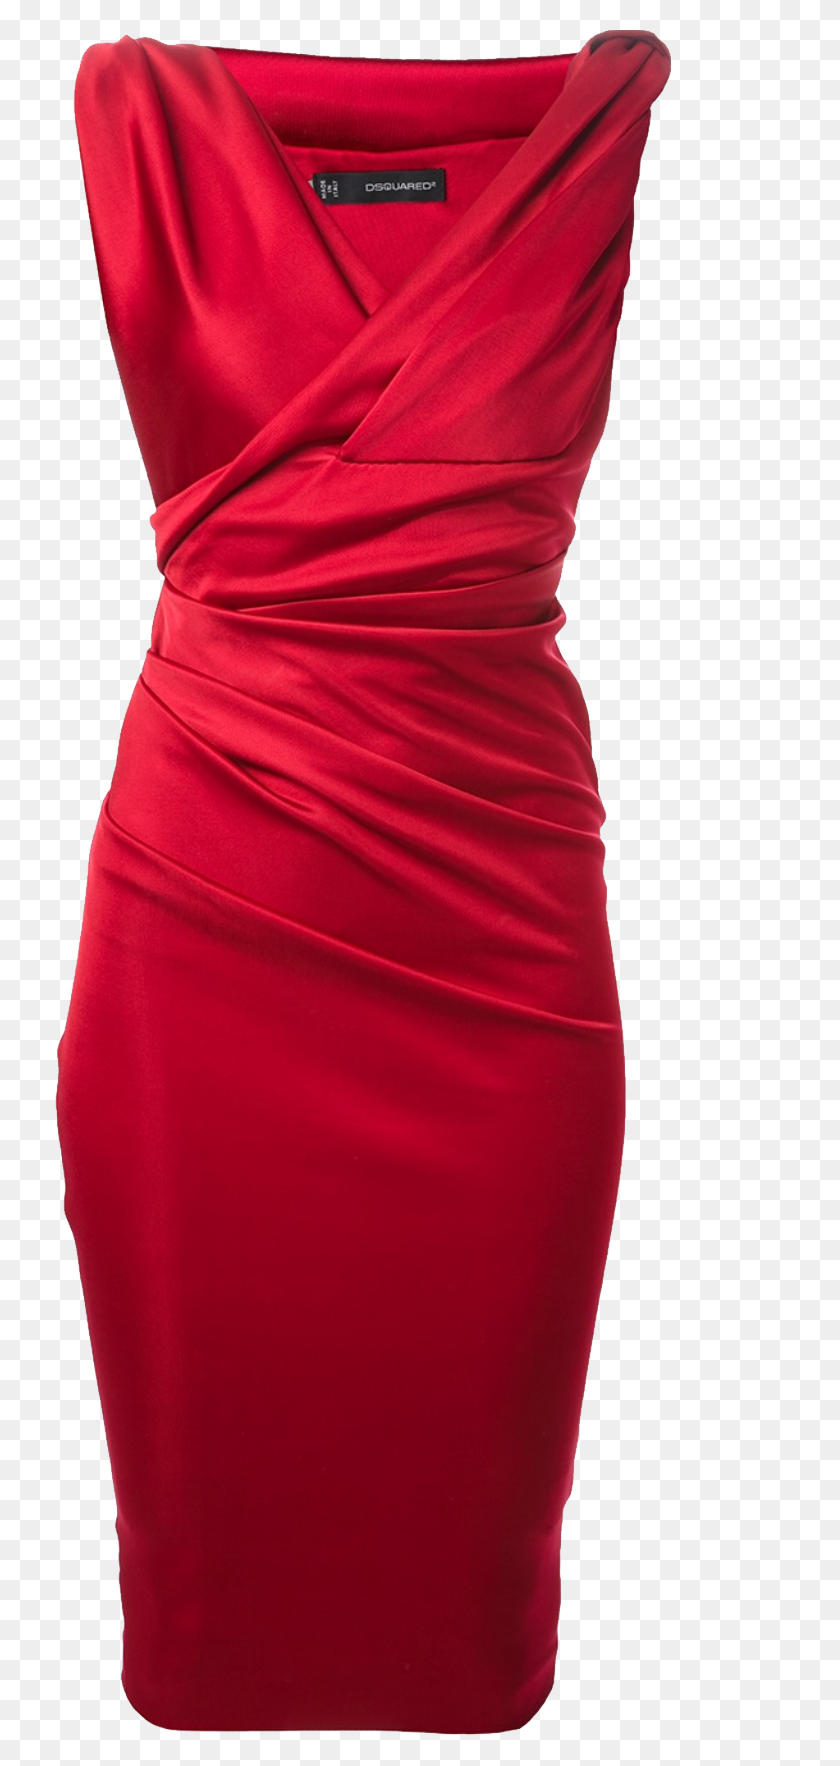 764x1706 Dress Png Images Free Download - Dress PNG